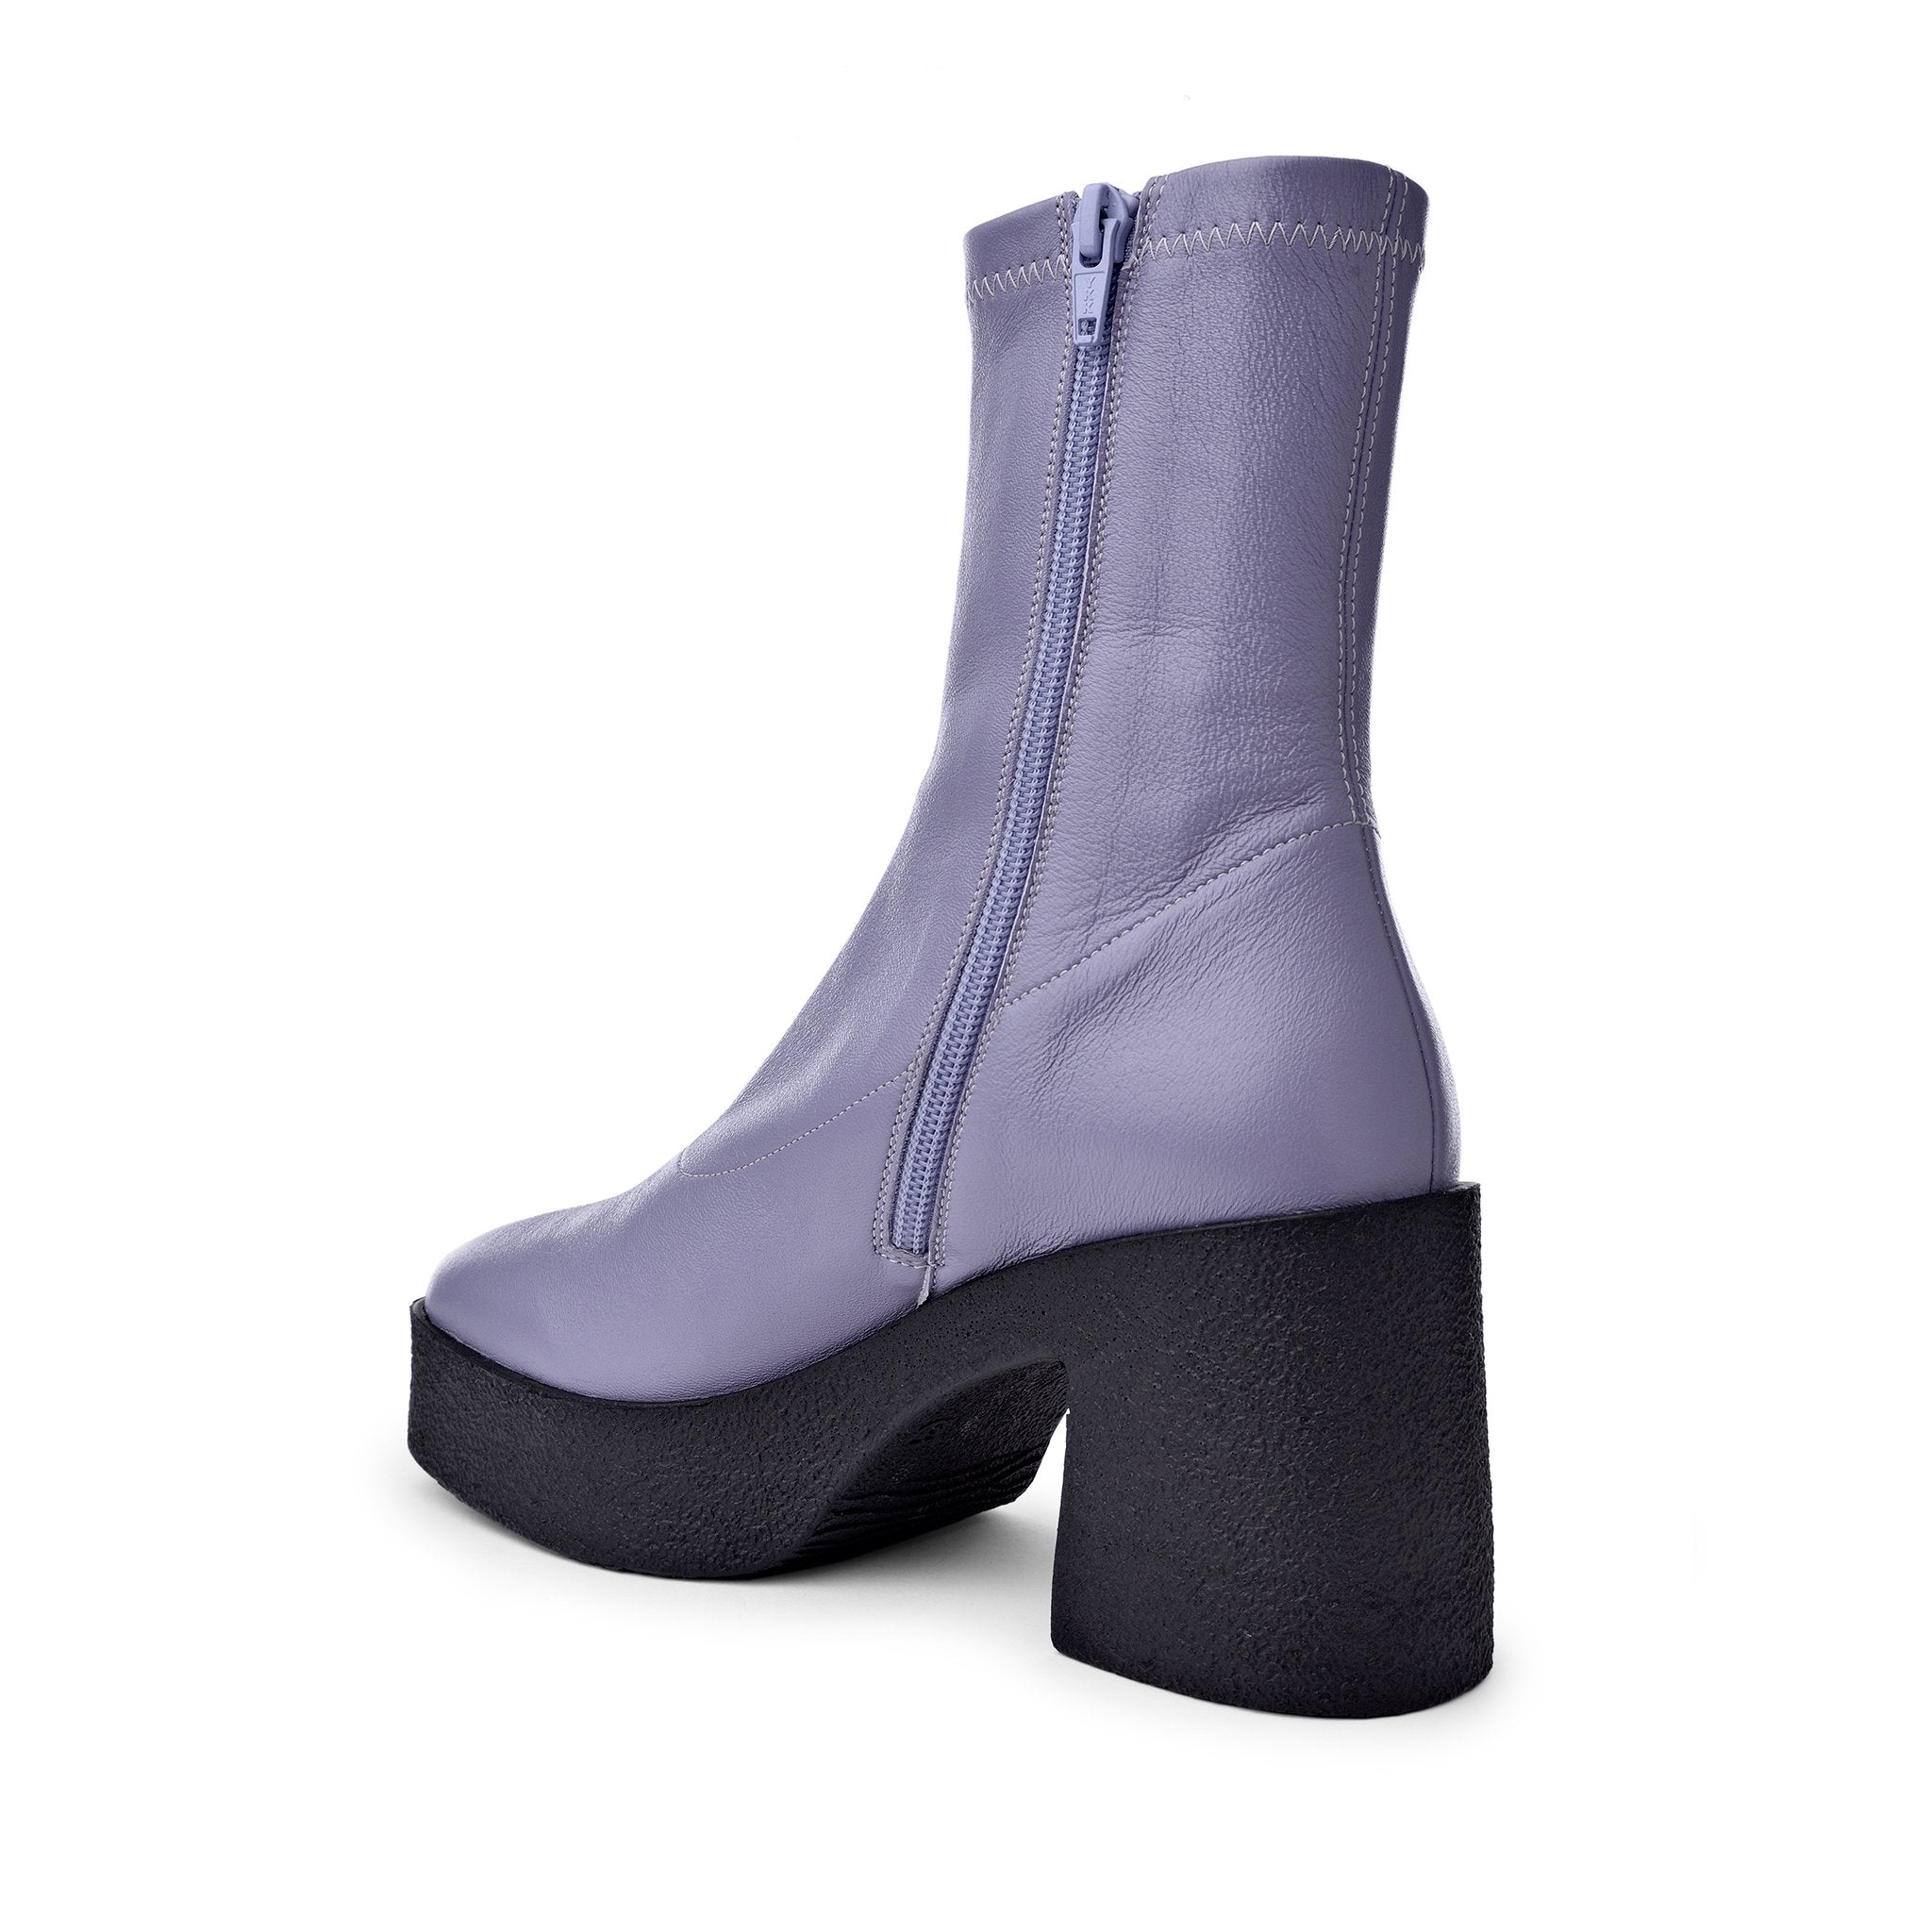 Umi Pastel Lilac Stretch Leather Chunky Ankle Boots 20077-02-11 - 11